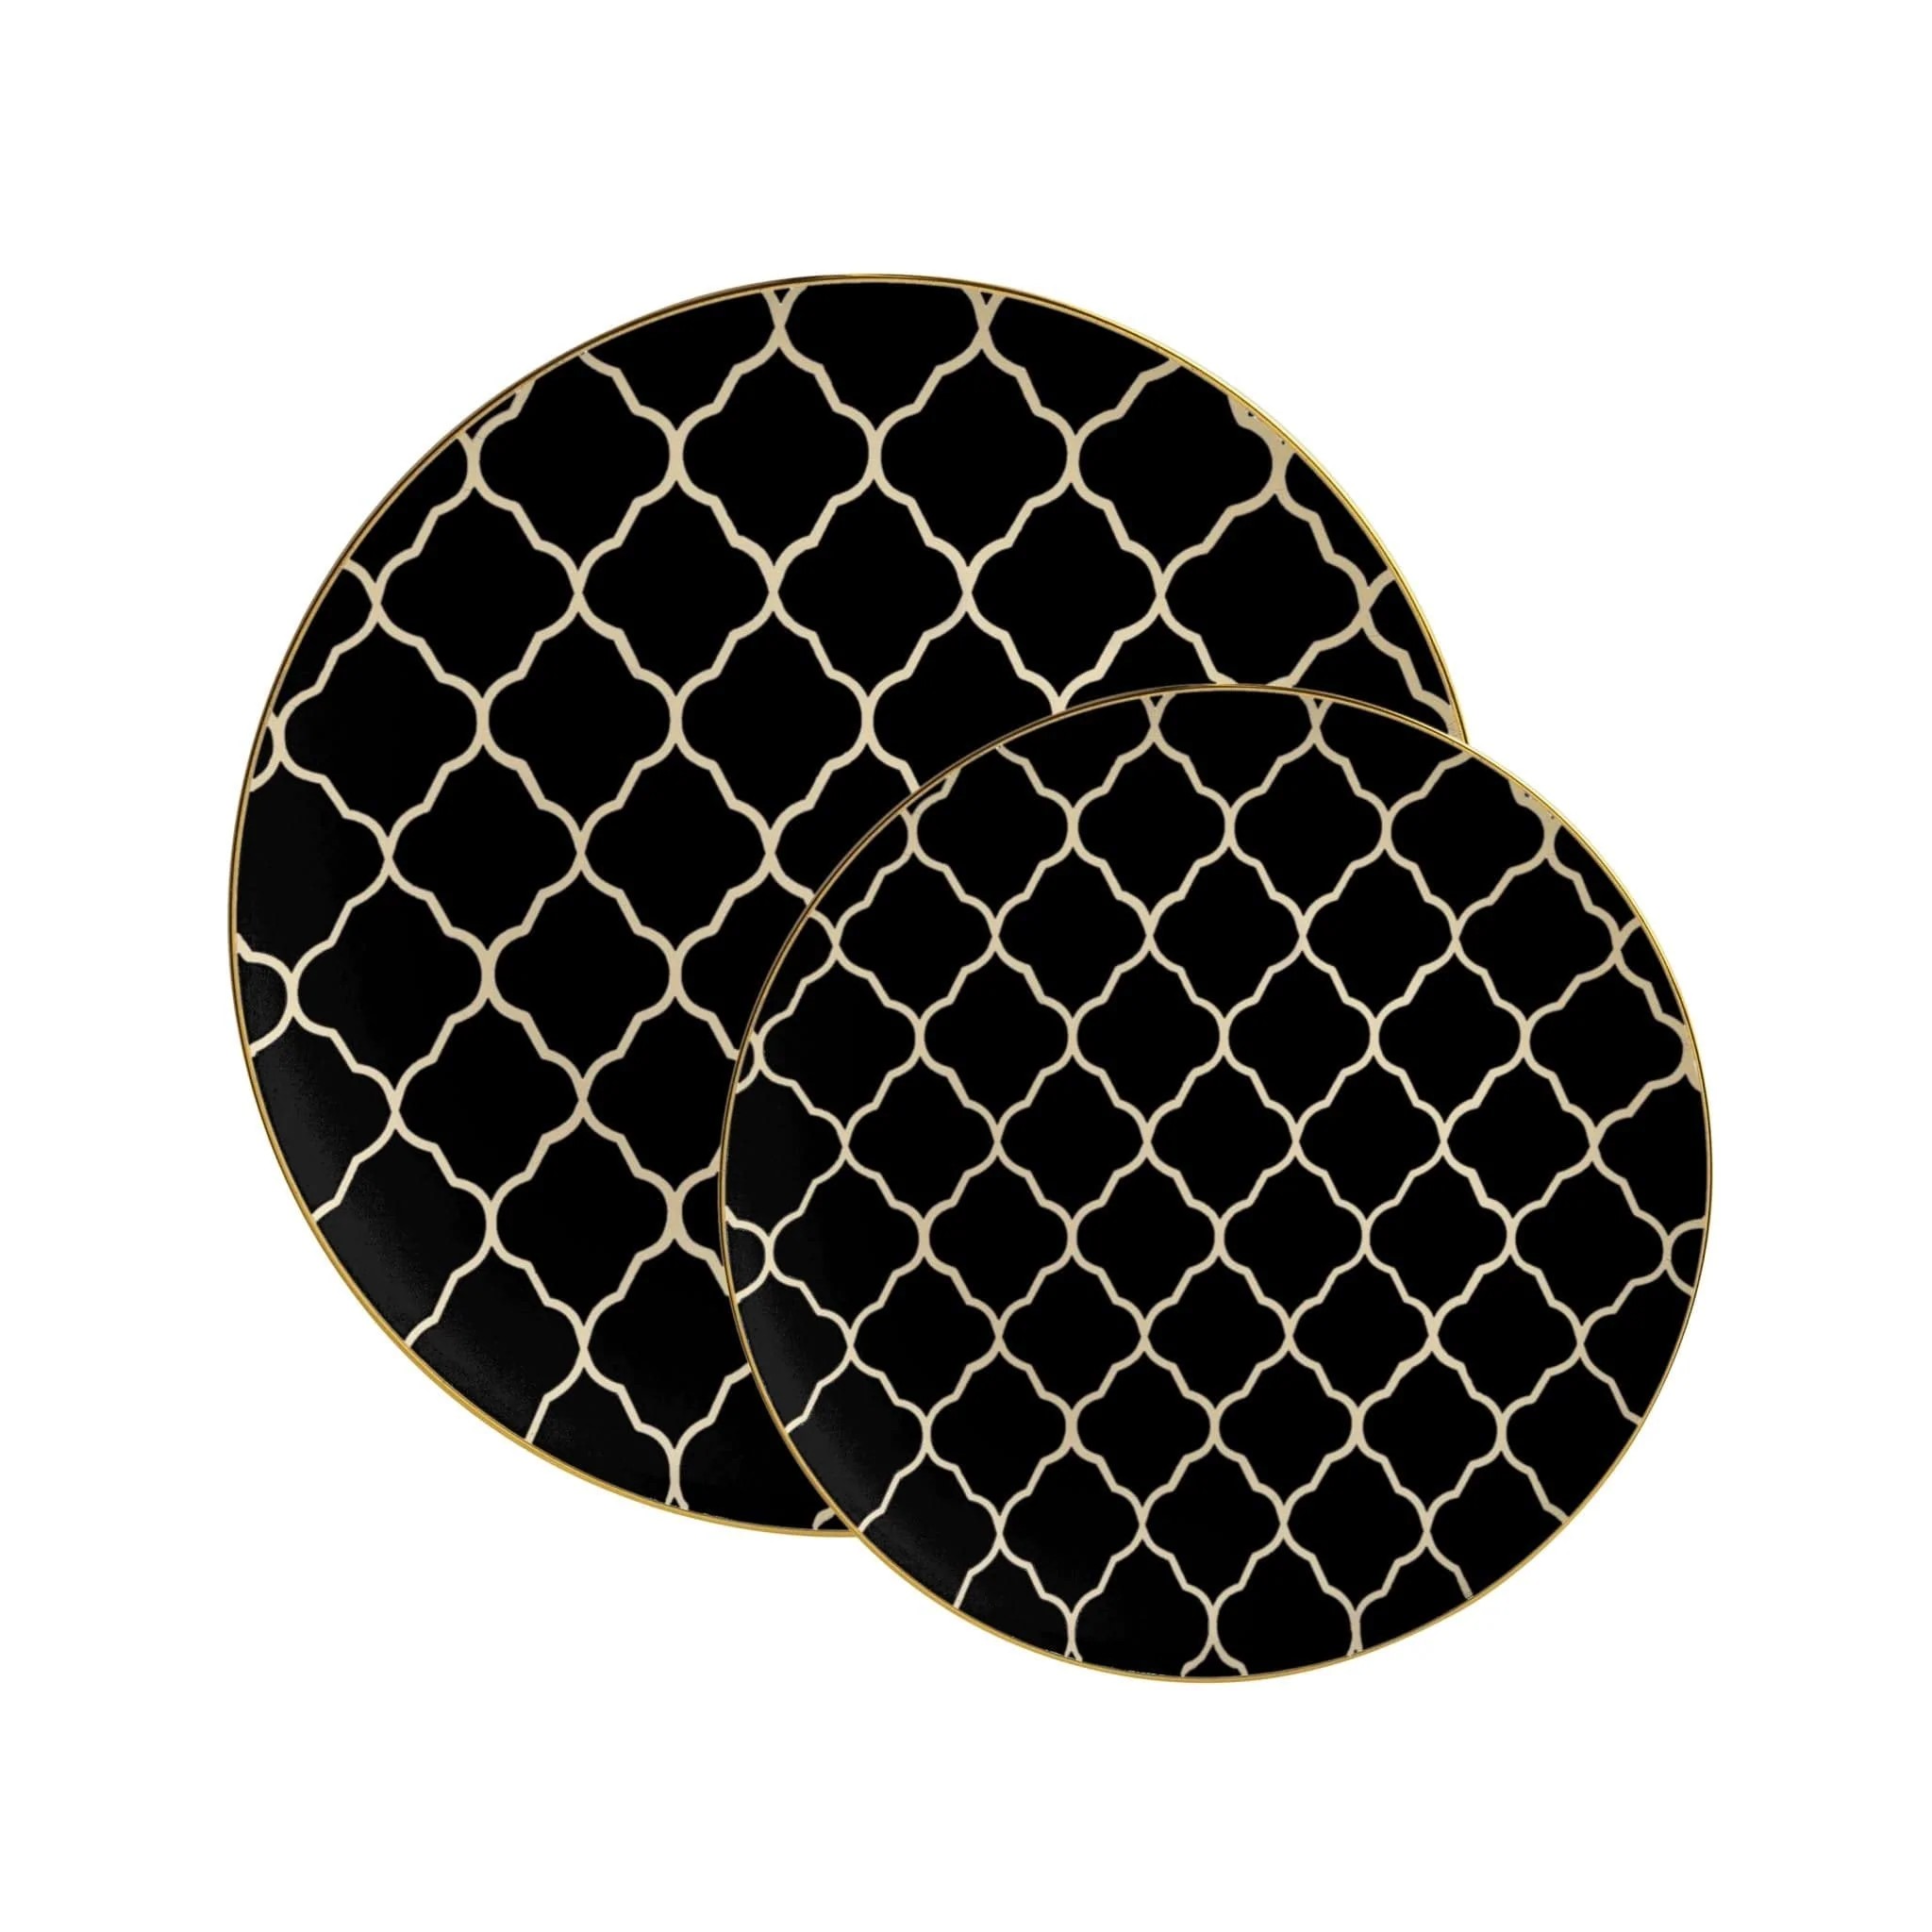 Luxe Party Black with Gold Lattice Pattern Plastic Appetizer Plate 7.25